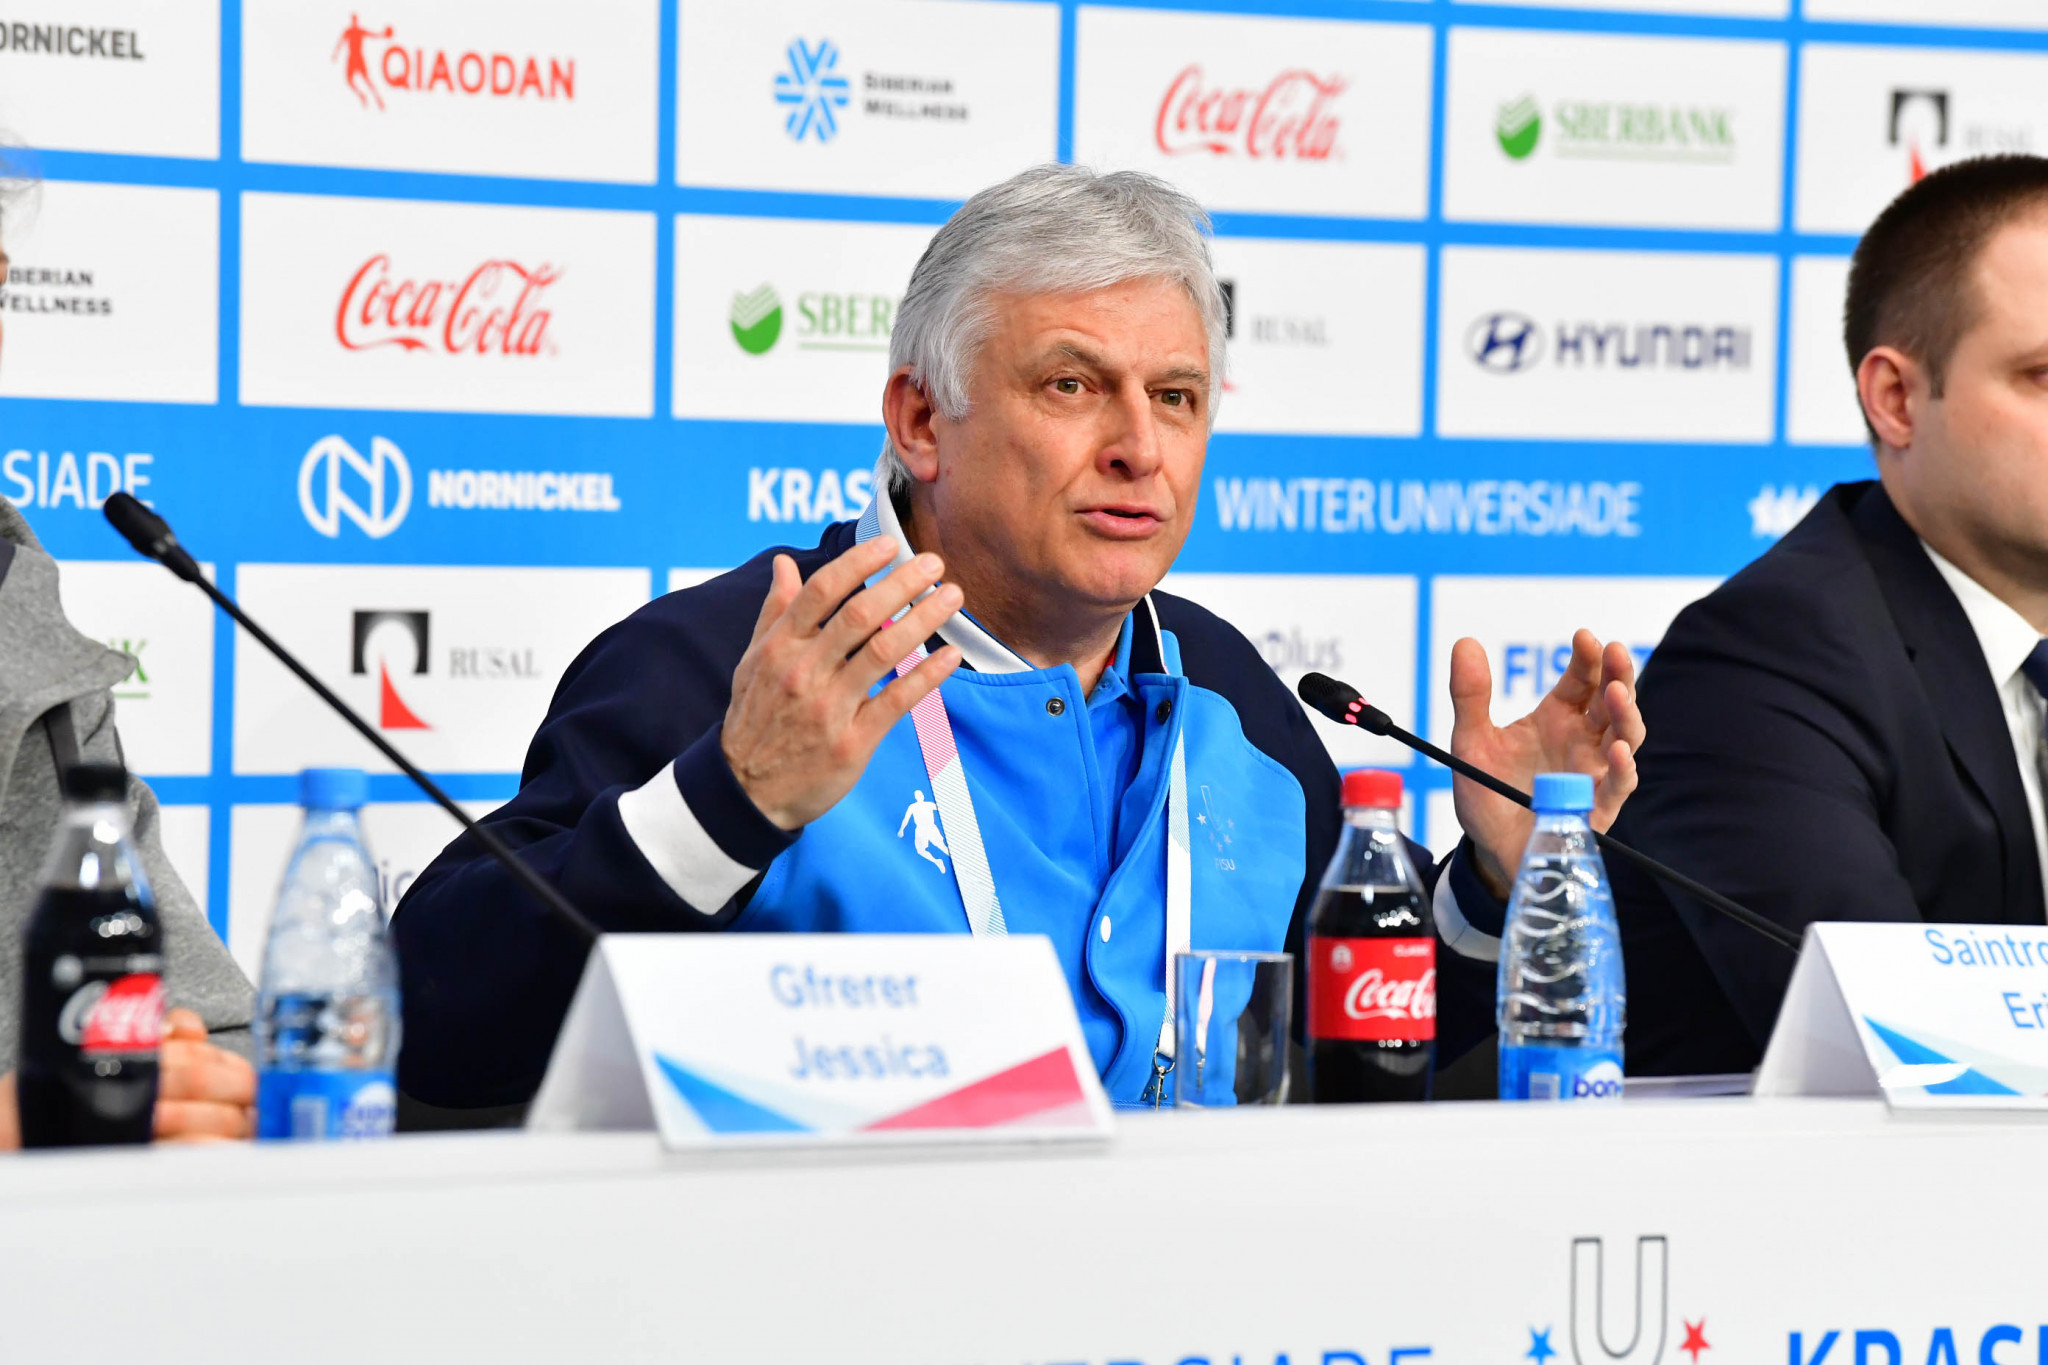 The day opened with a press conference in which the legacy of the 2019 Winter Universiade was discussed ©Krasnoyarsk 2019